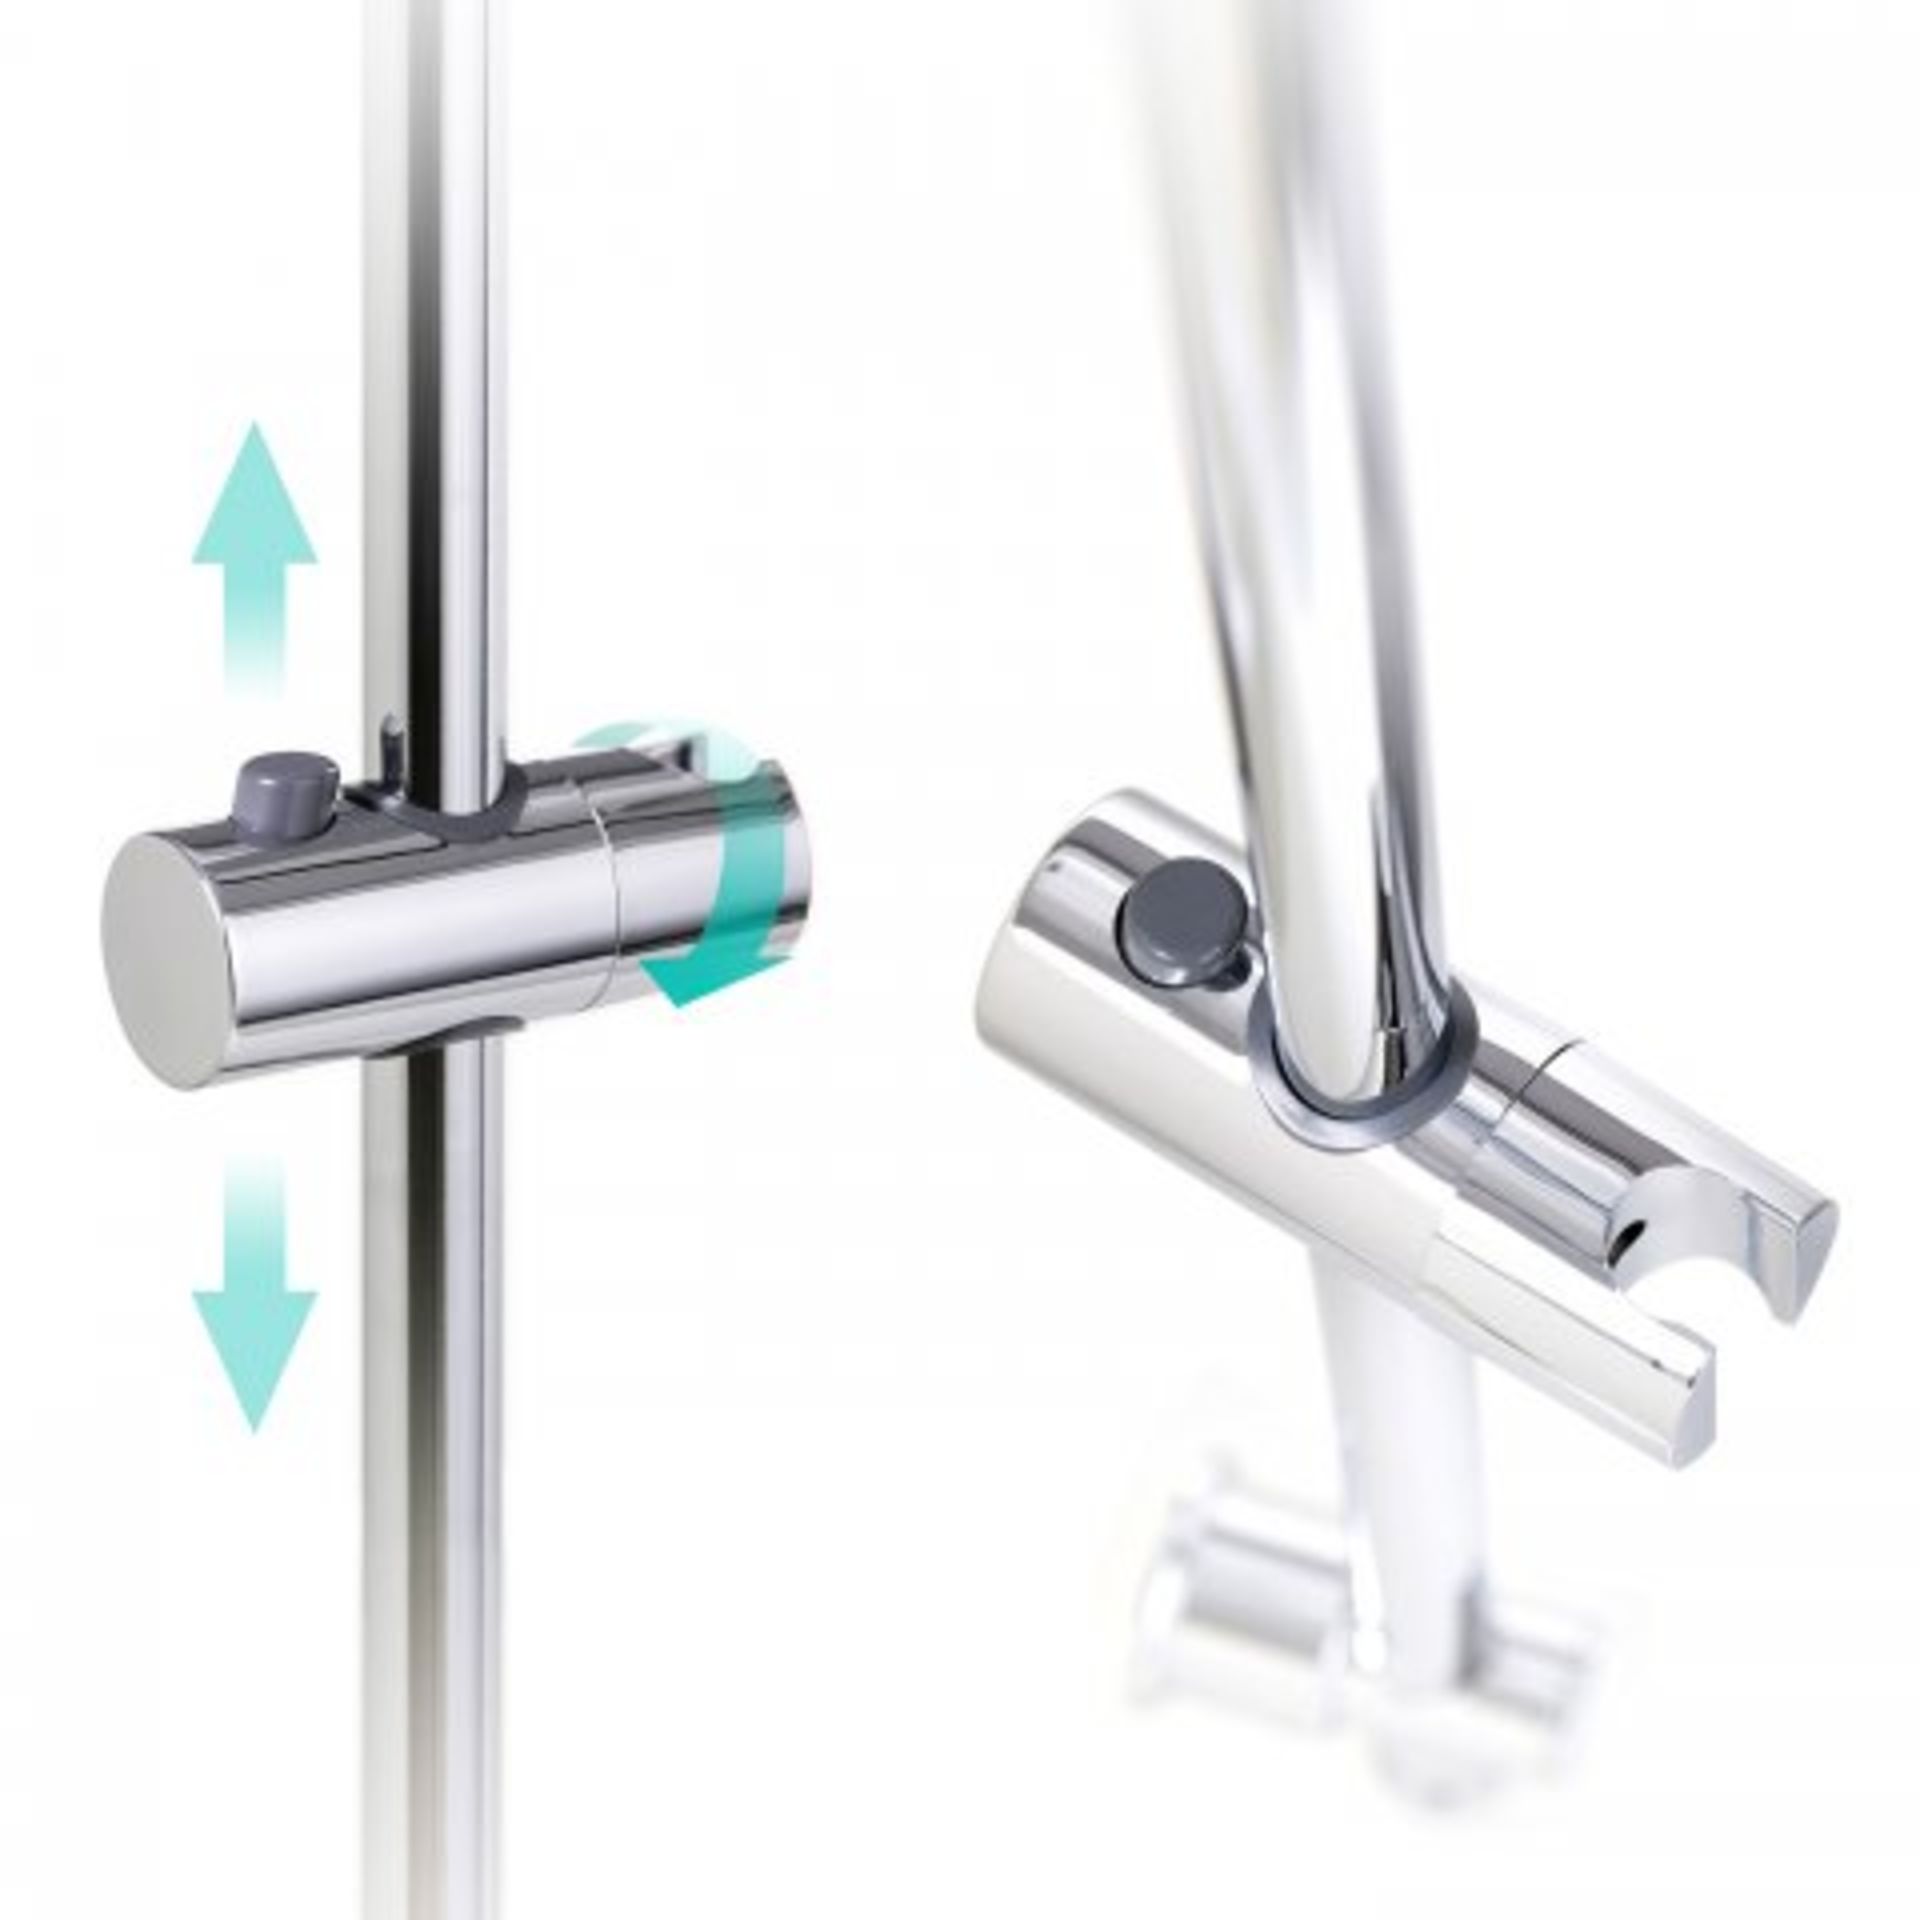 (T208) Square Exposed Thermostatic Shower Kit & Medium Shower Head. The straight lines and - Image 7 of 7